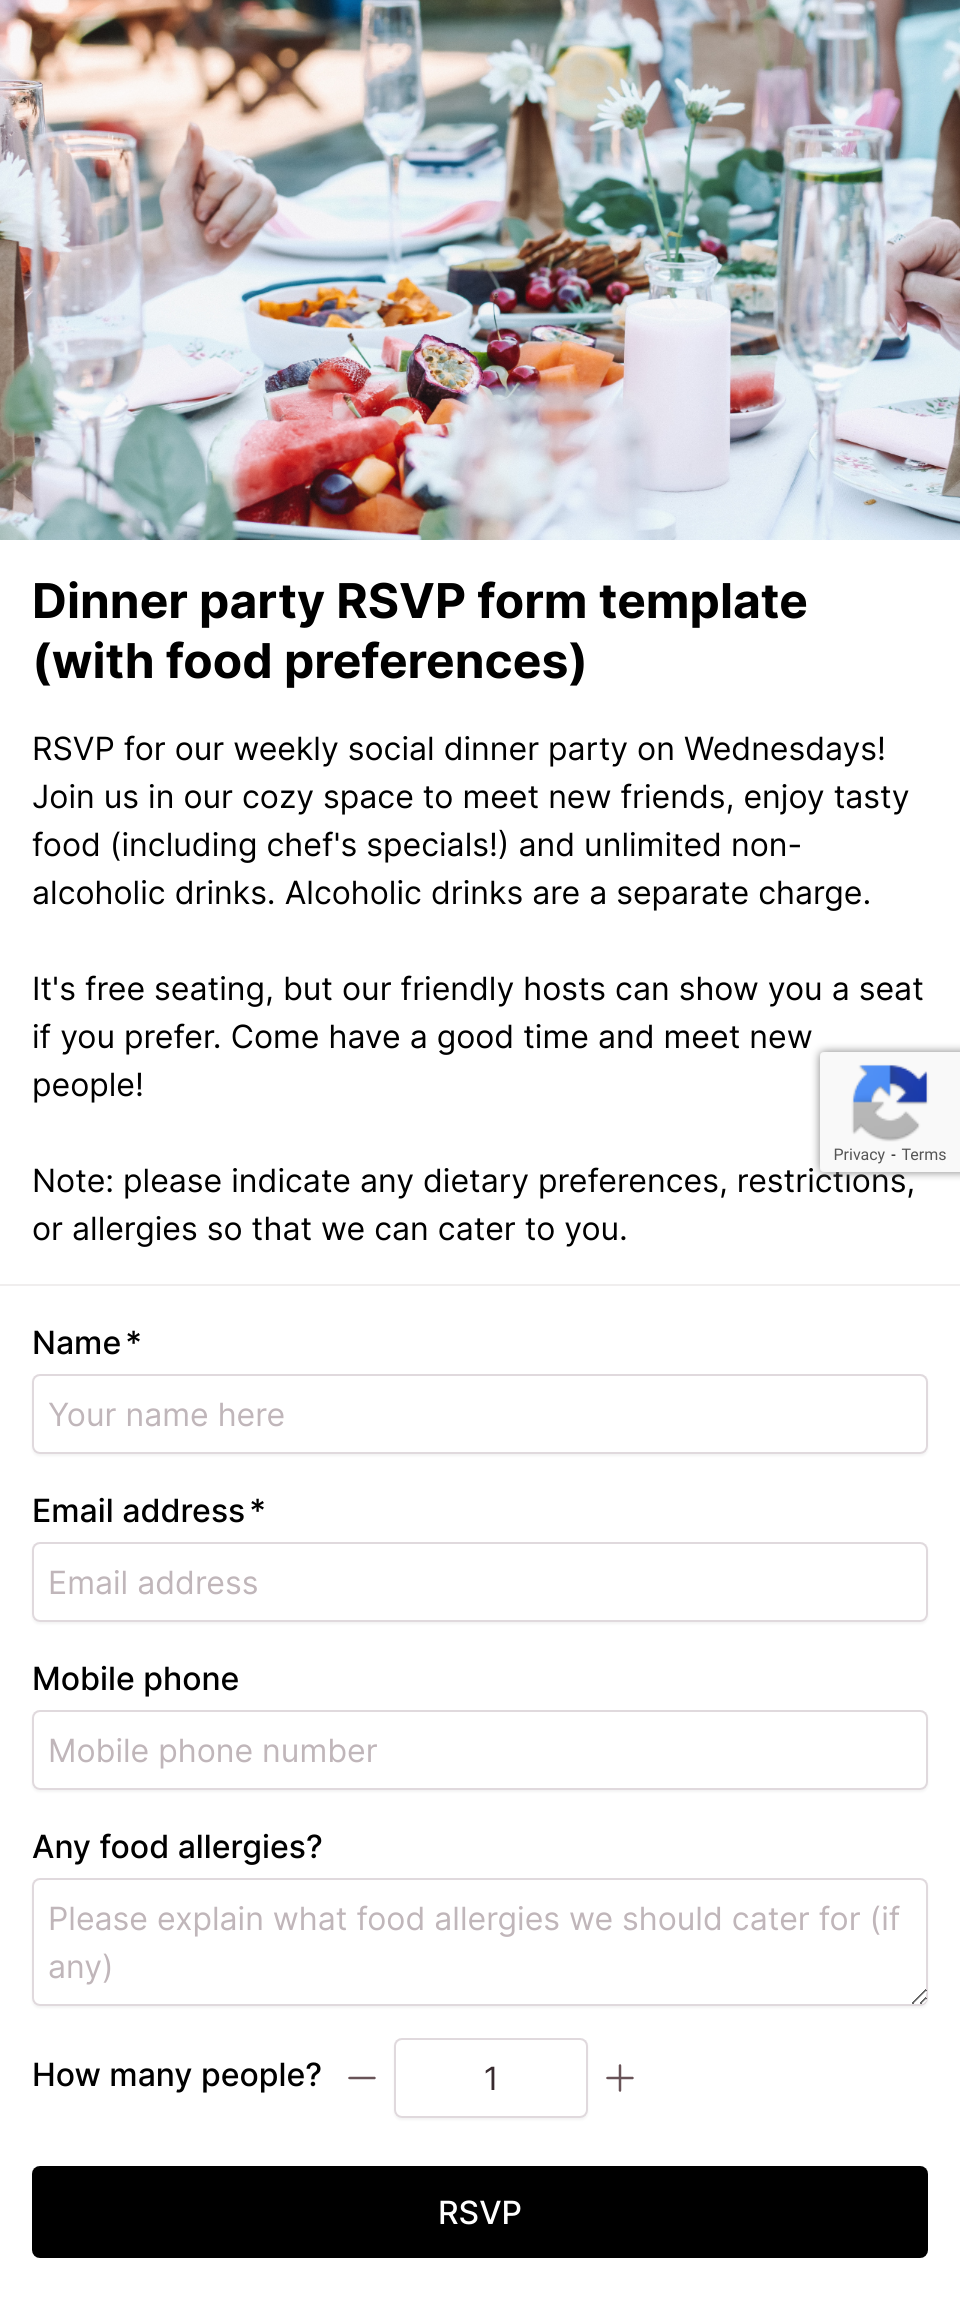 Dinner party RSVP form template